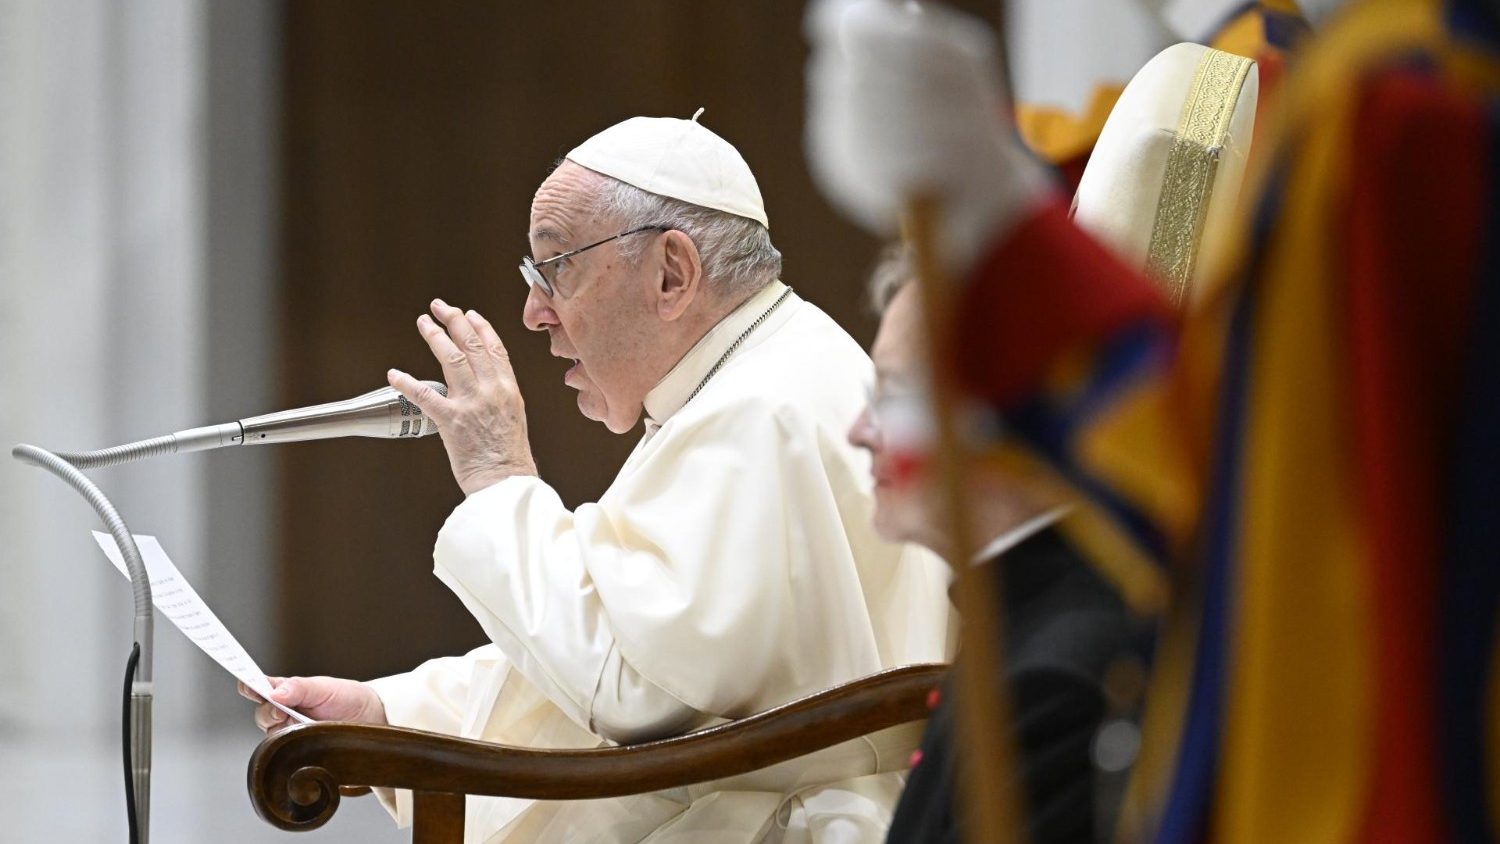 Pope at Audience: ‘Alliance between youth and elderly will save humanity’